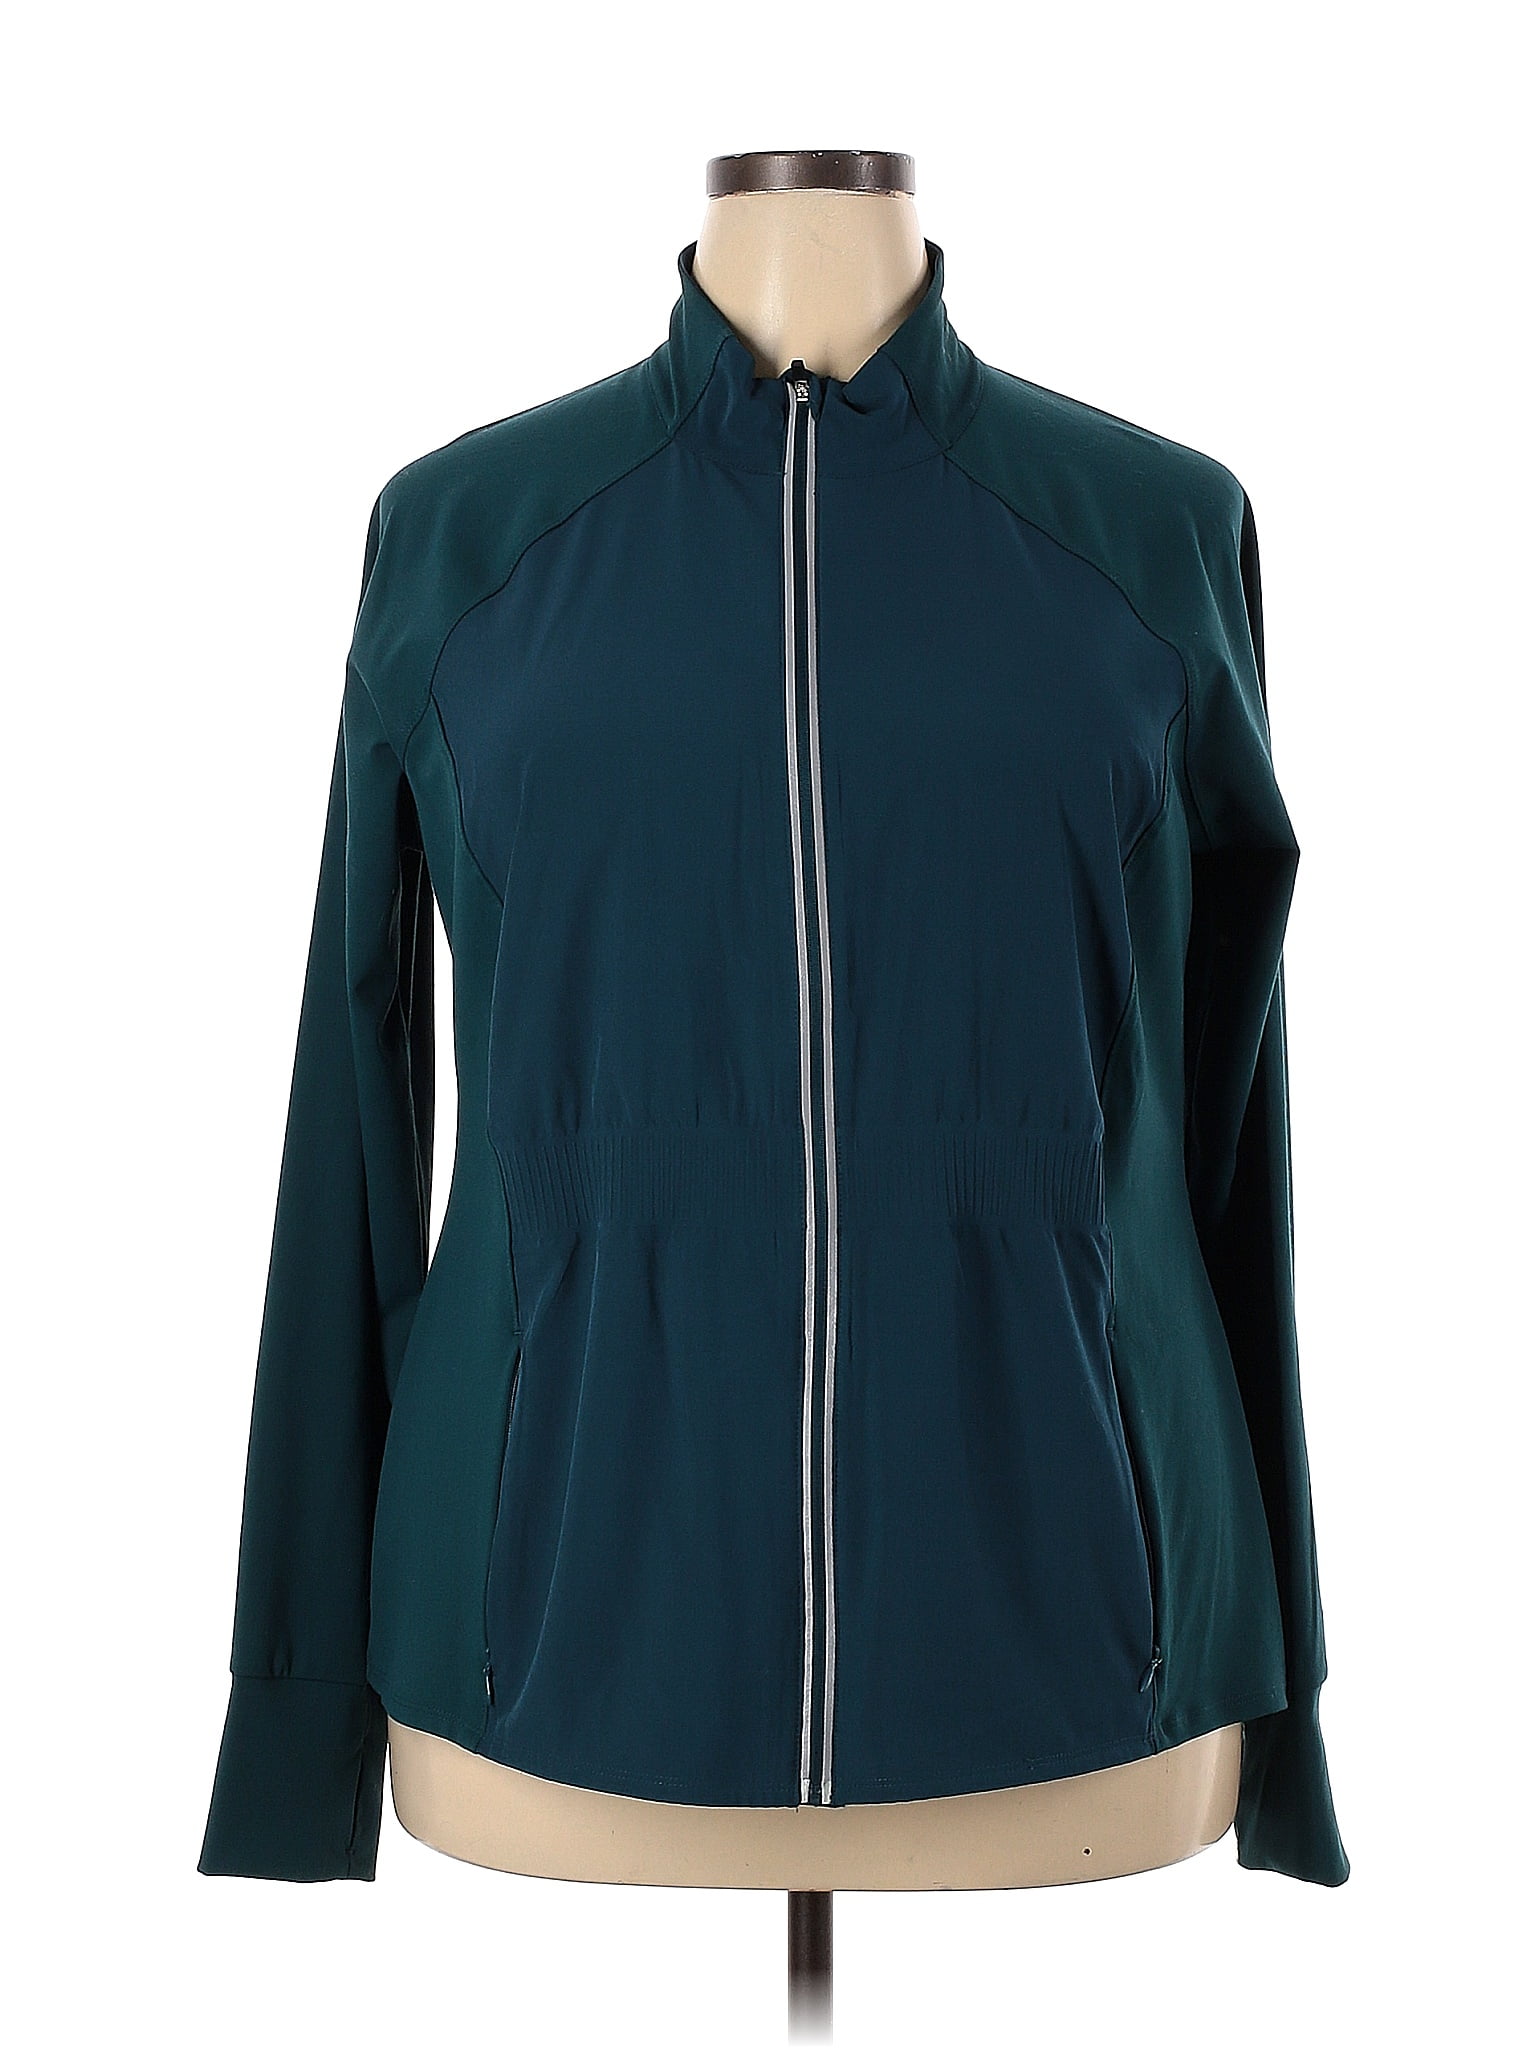 Avia Solid Teal Track Jacket Size 20 (Plus) - 31% off